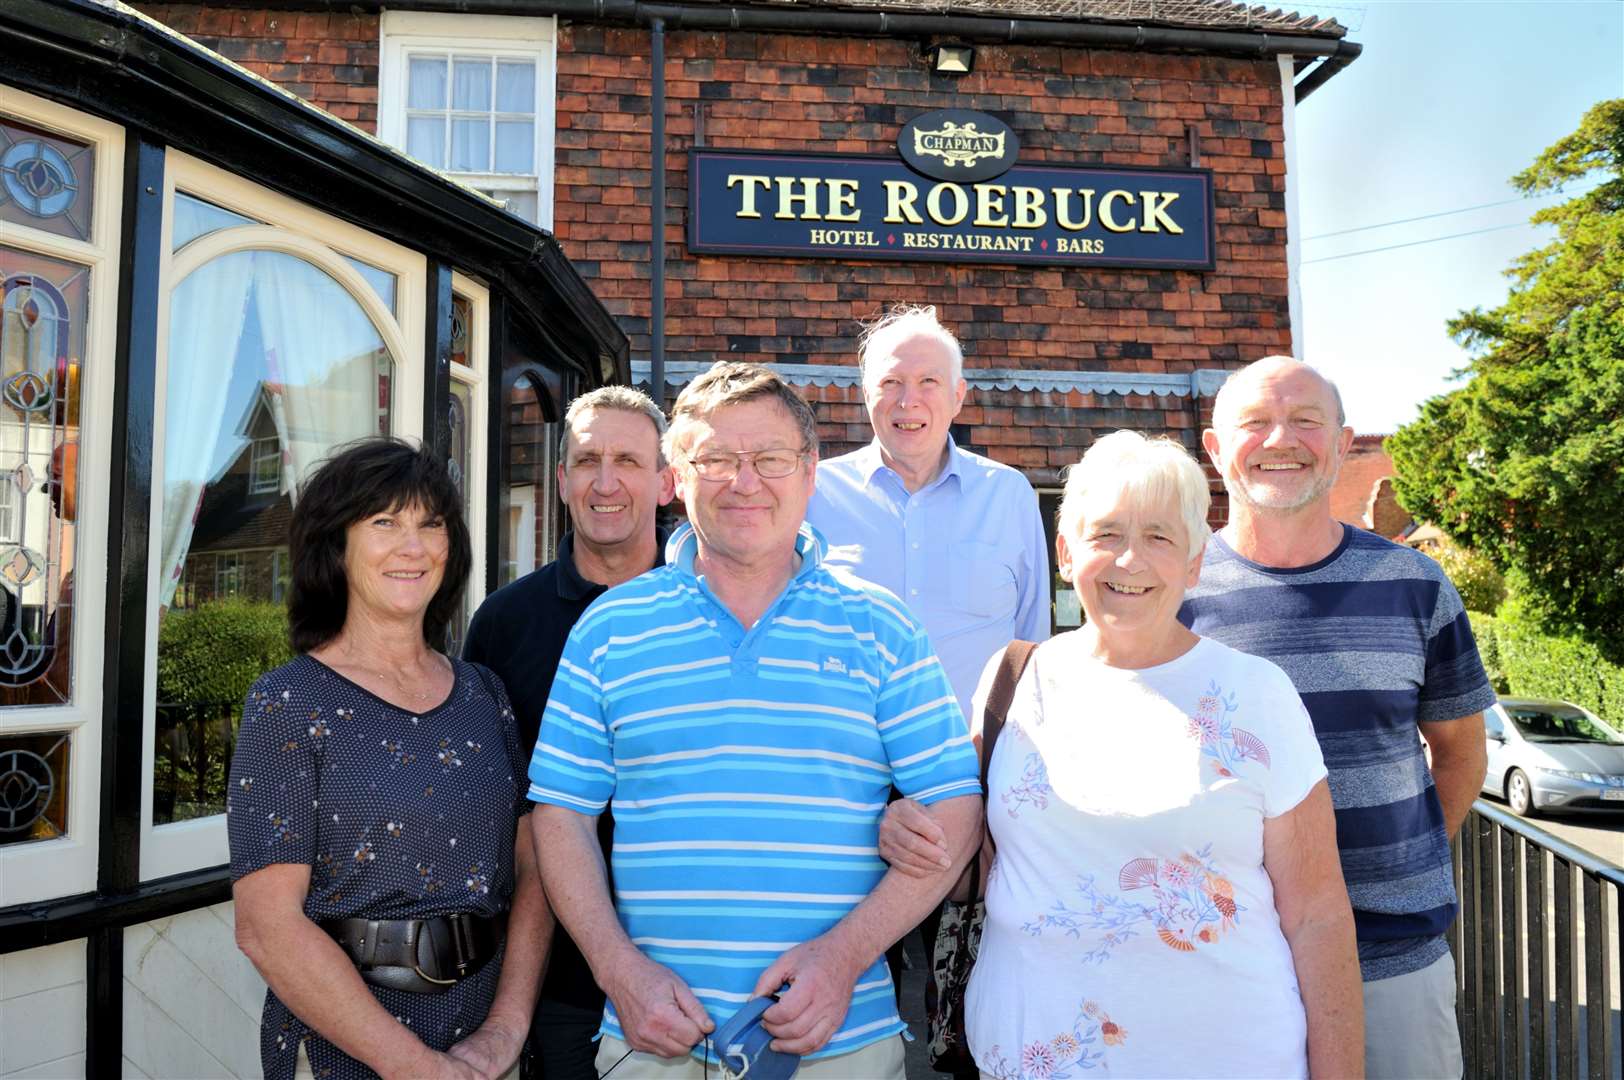 Members of Roebuck Community Action Group. From left to right, Helen Bunyard, Steve Cooke, Peter Bowler, Chris Roots, Jackie Hewitson and John Totman